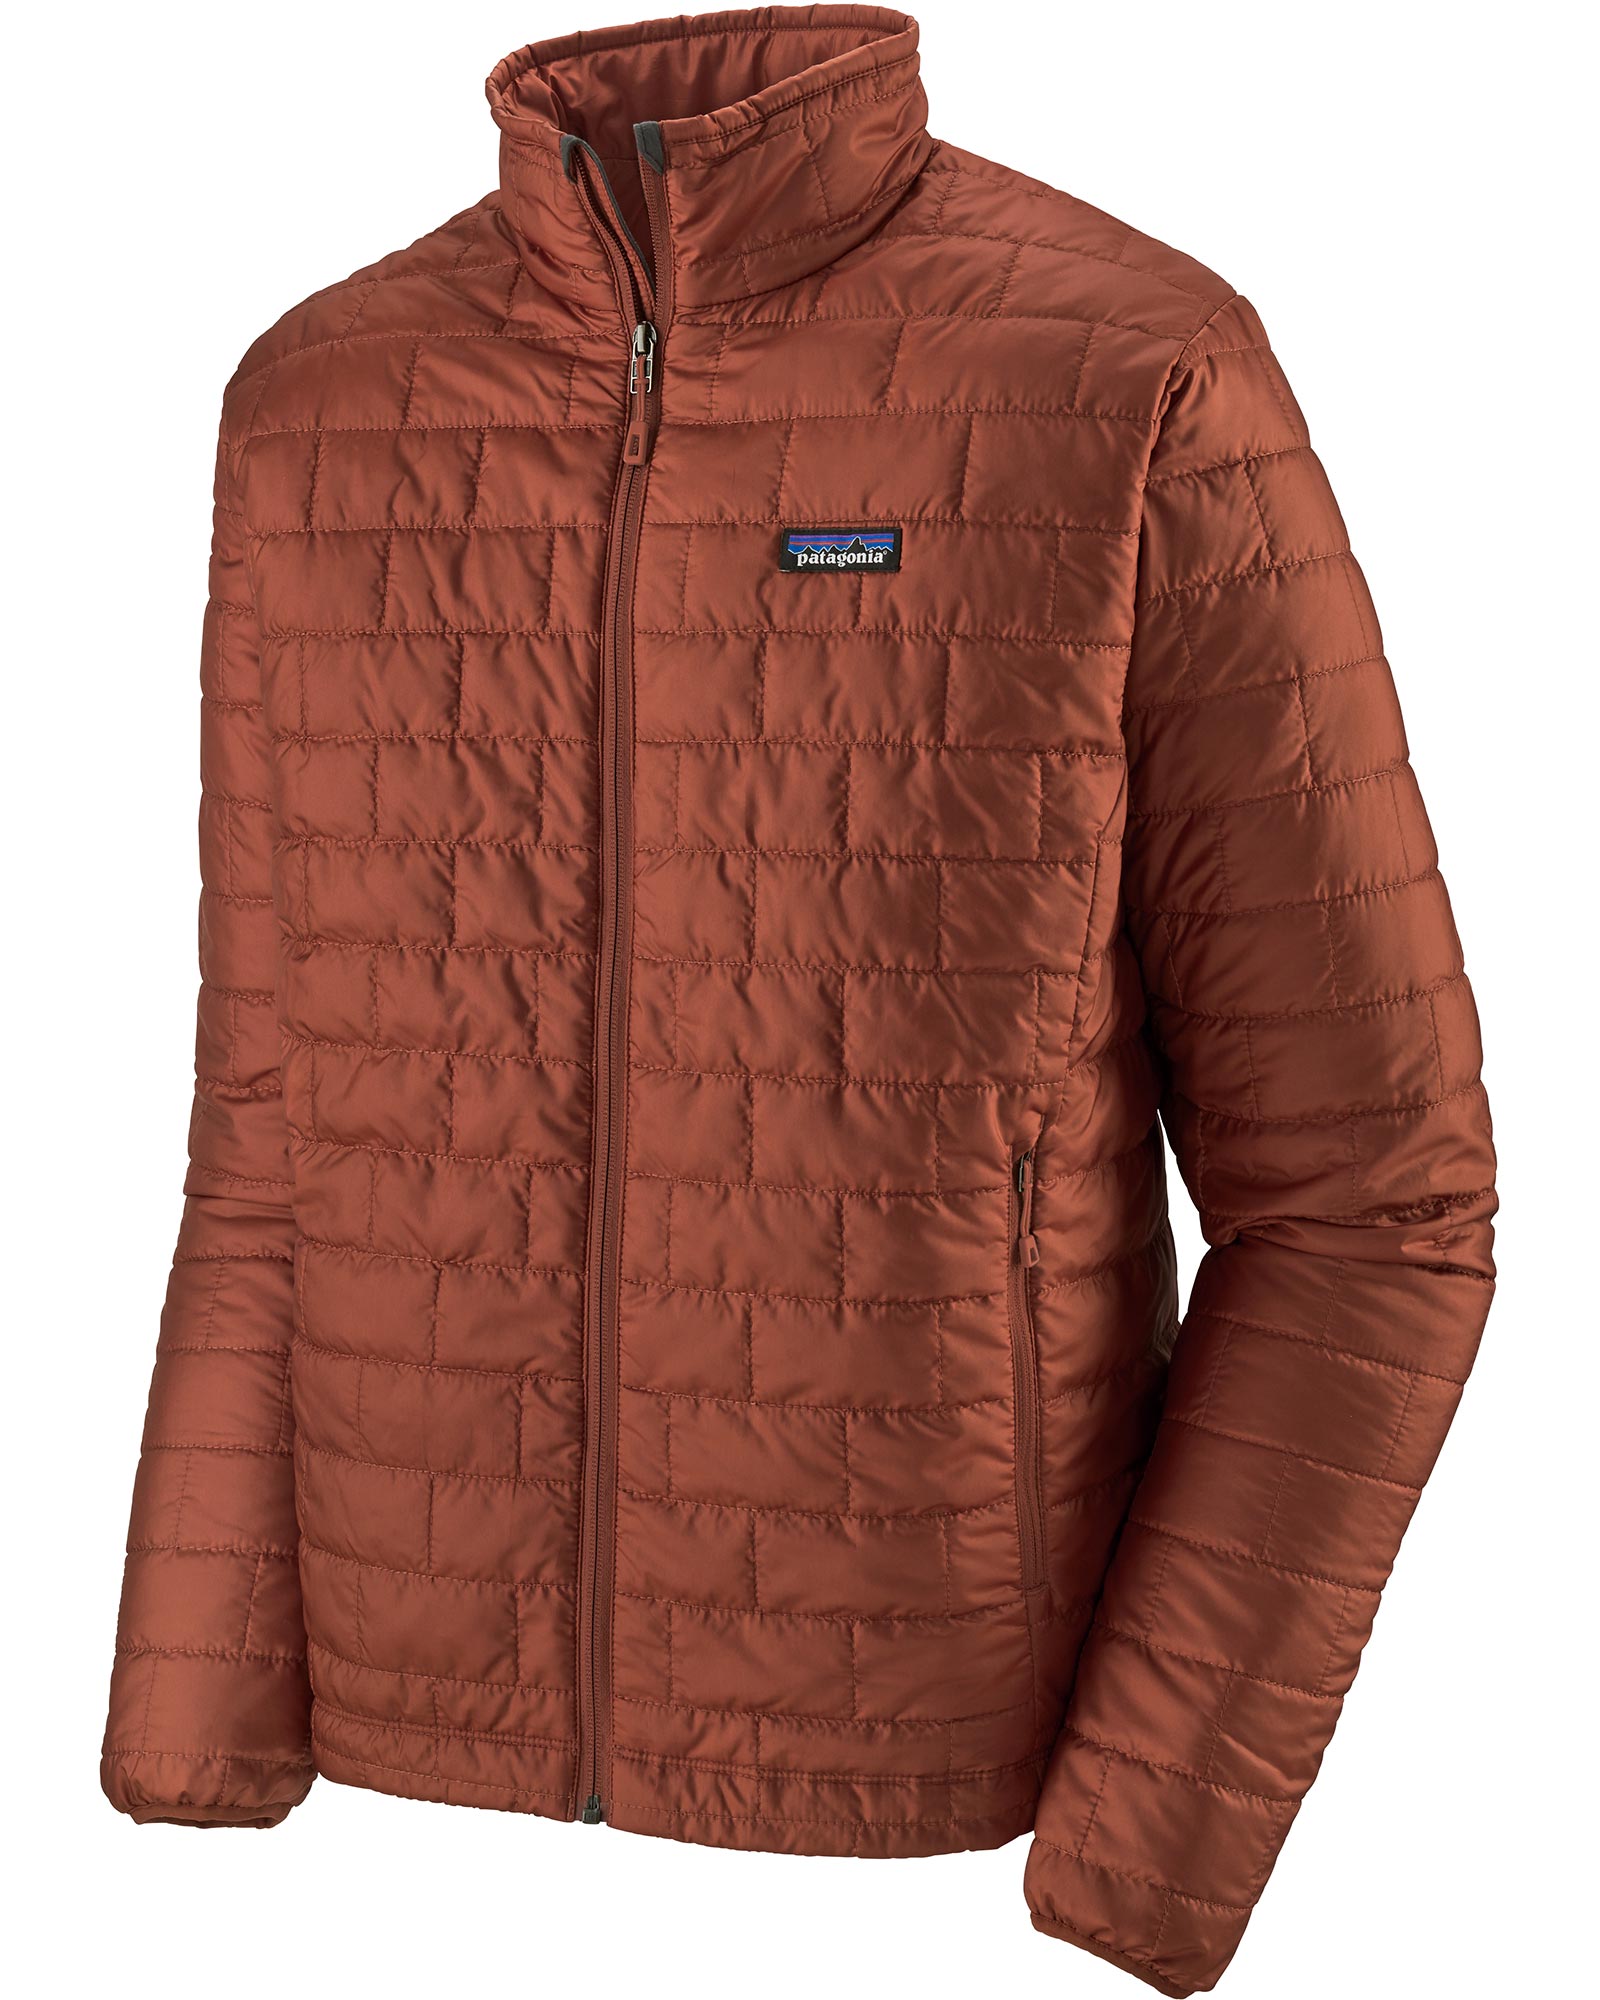 Patagonia Nano Puff Men’s Insulated Jacket - Barn Red XL